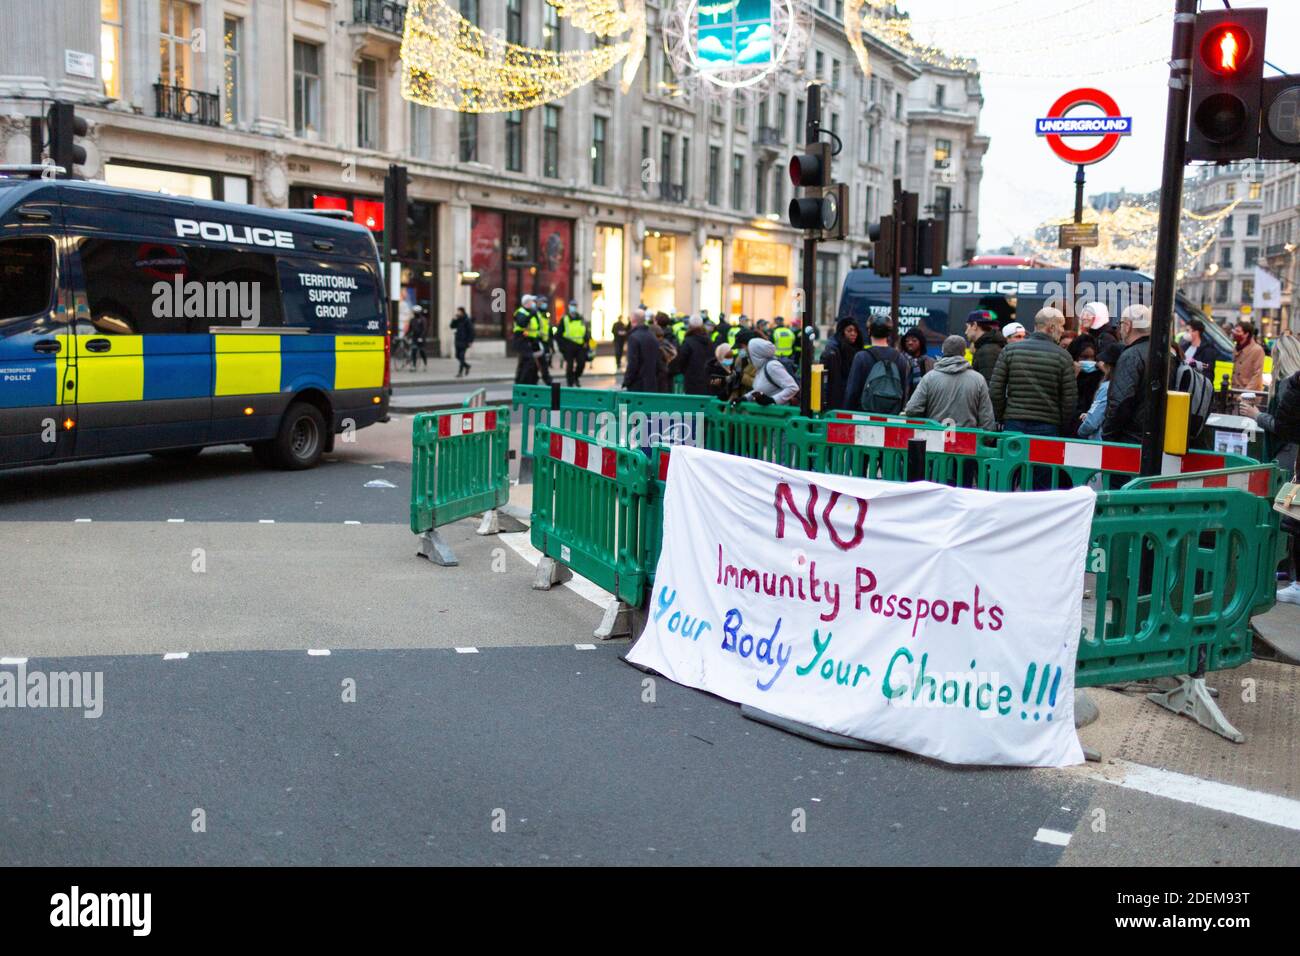 Anti-lockdown protest, London, 28 November 2020. A protest banner hung in Oxford Circus. Stock Photo